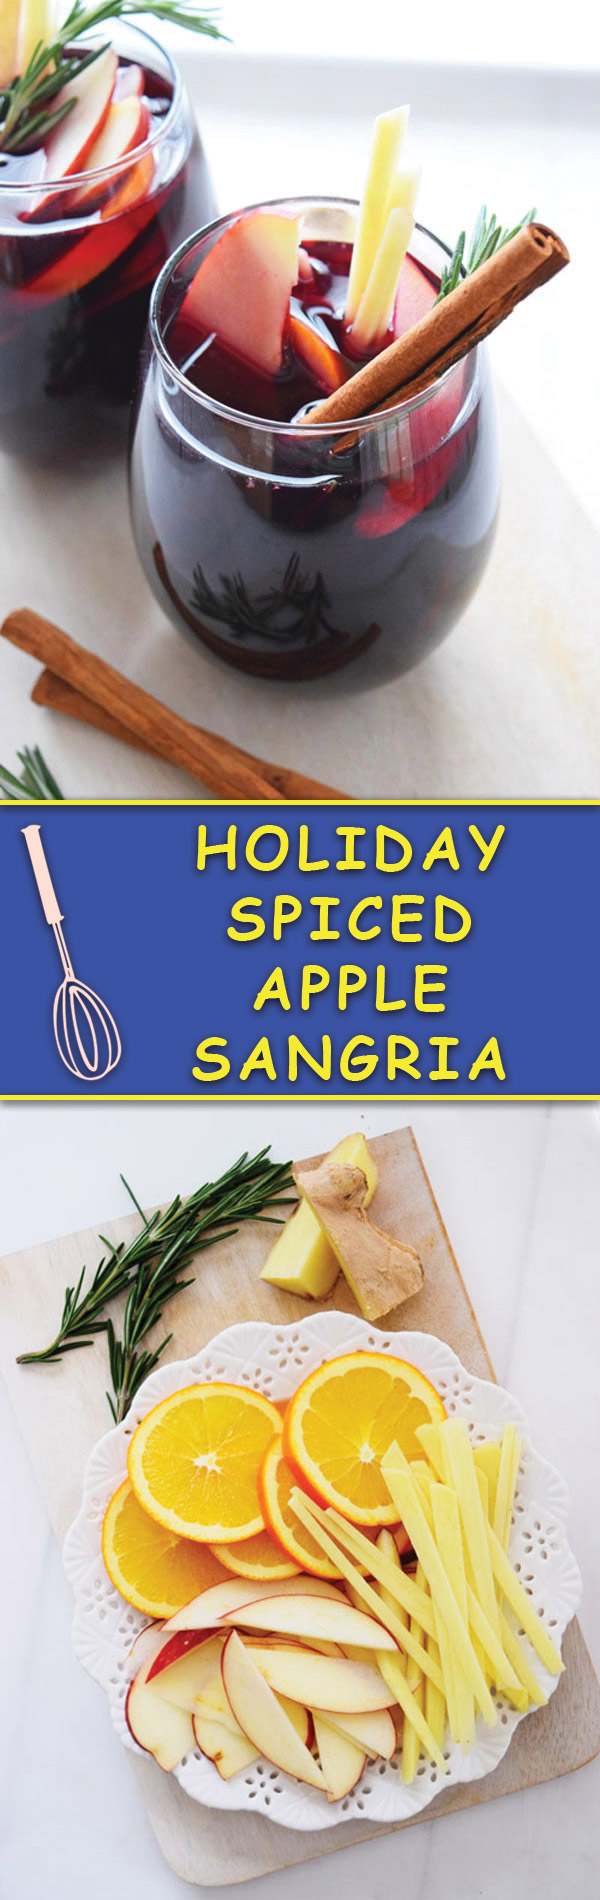 Spiced Apple Sangria - Delicious sangria with apples and spiced with cinnamon and